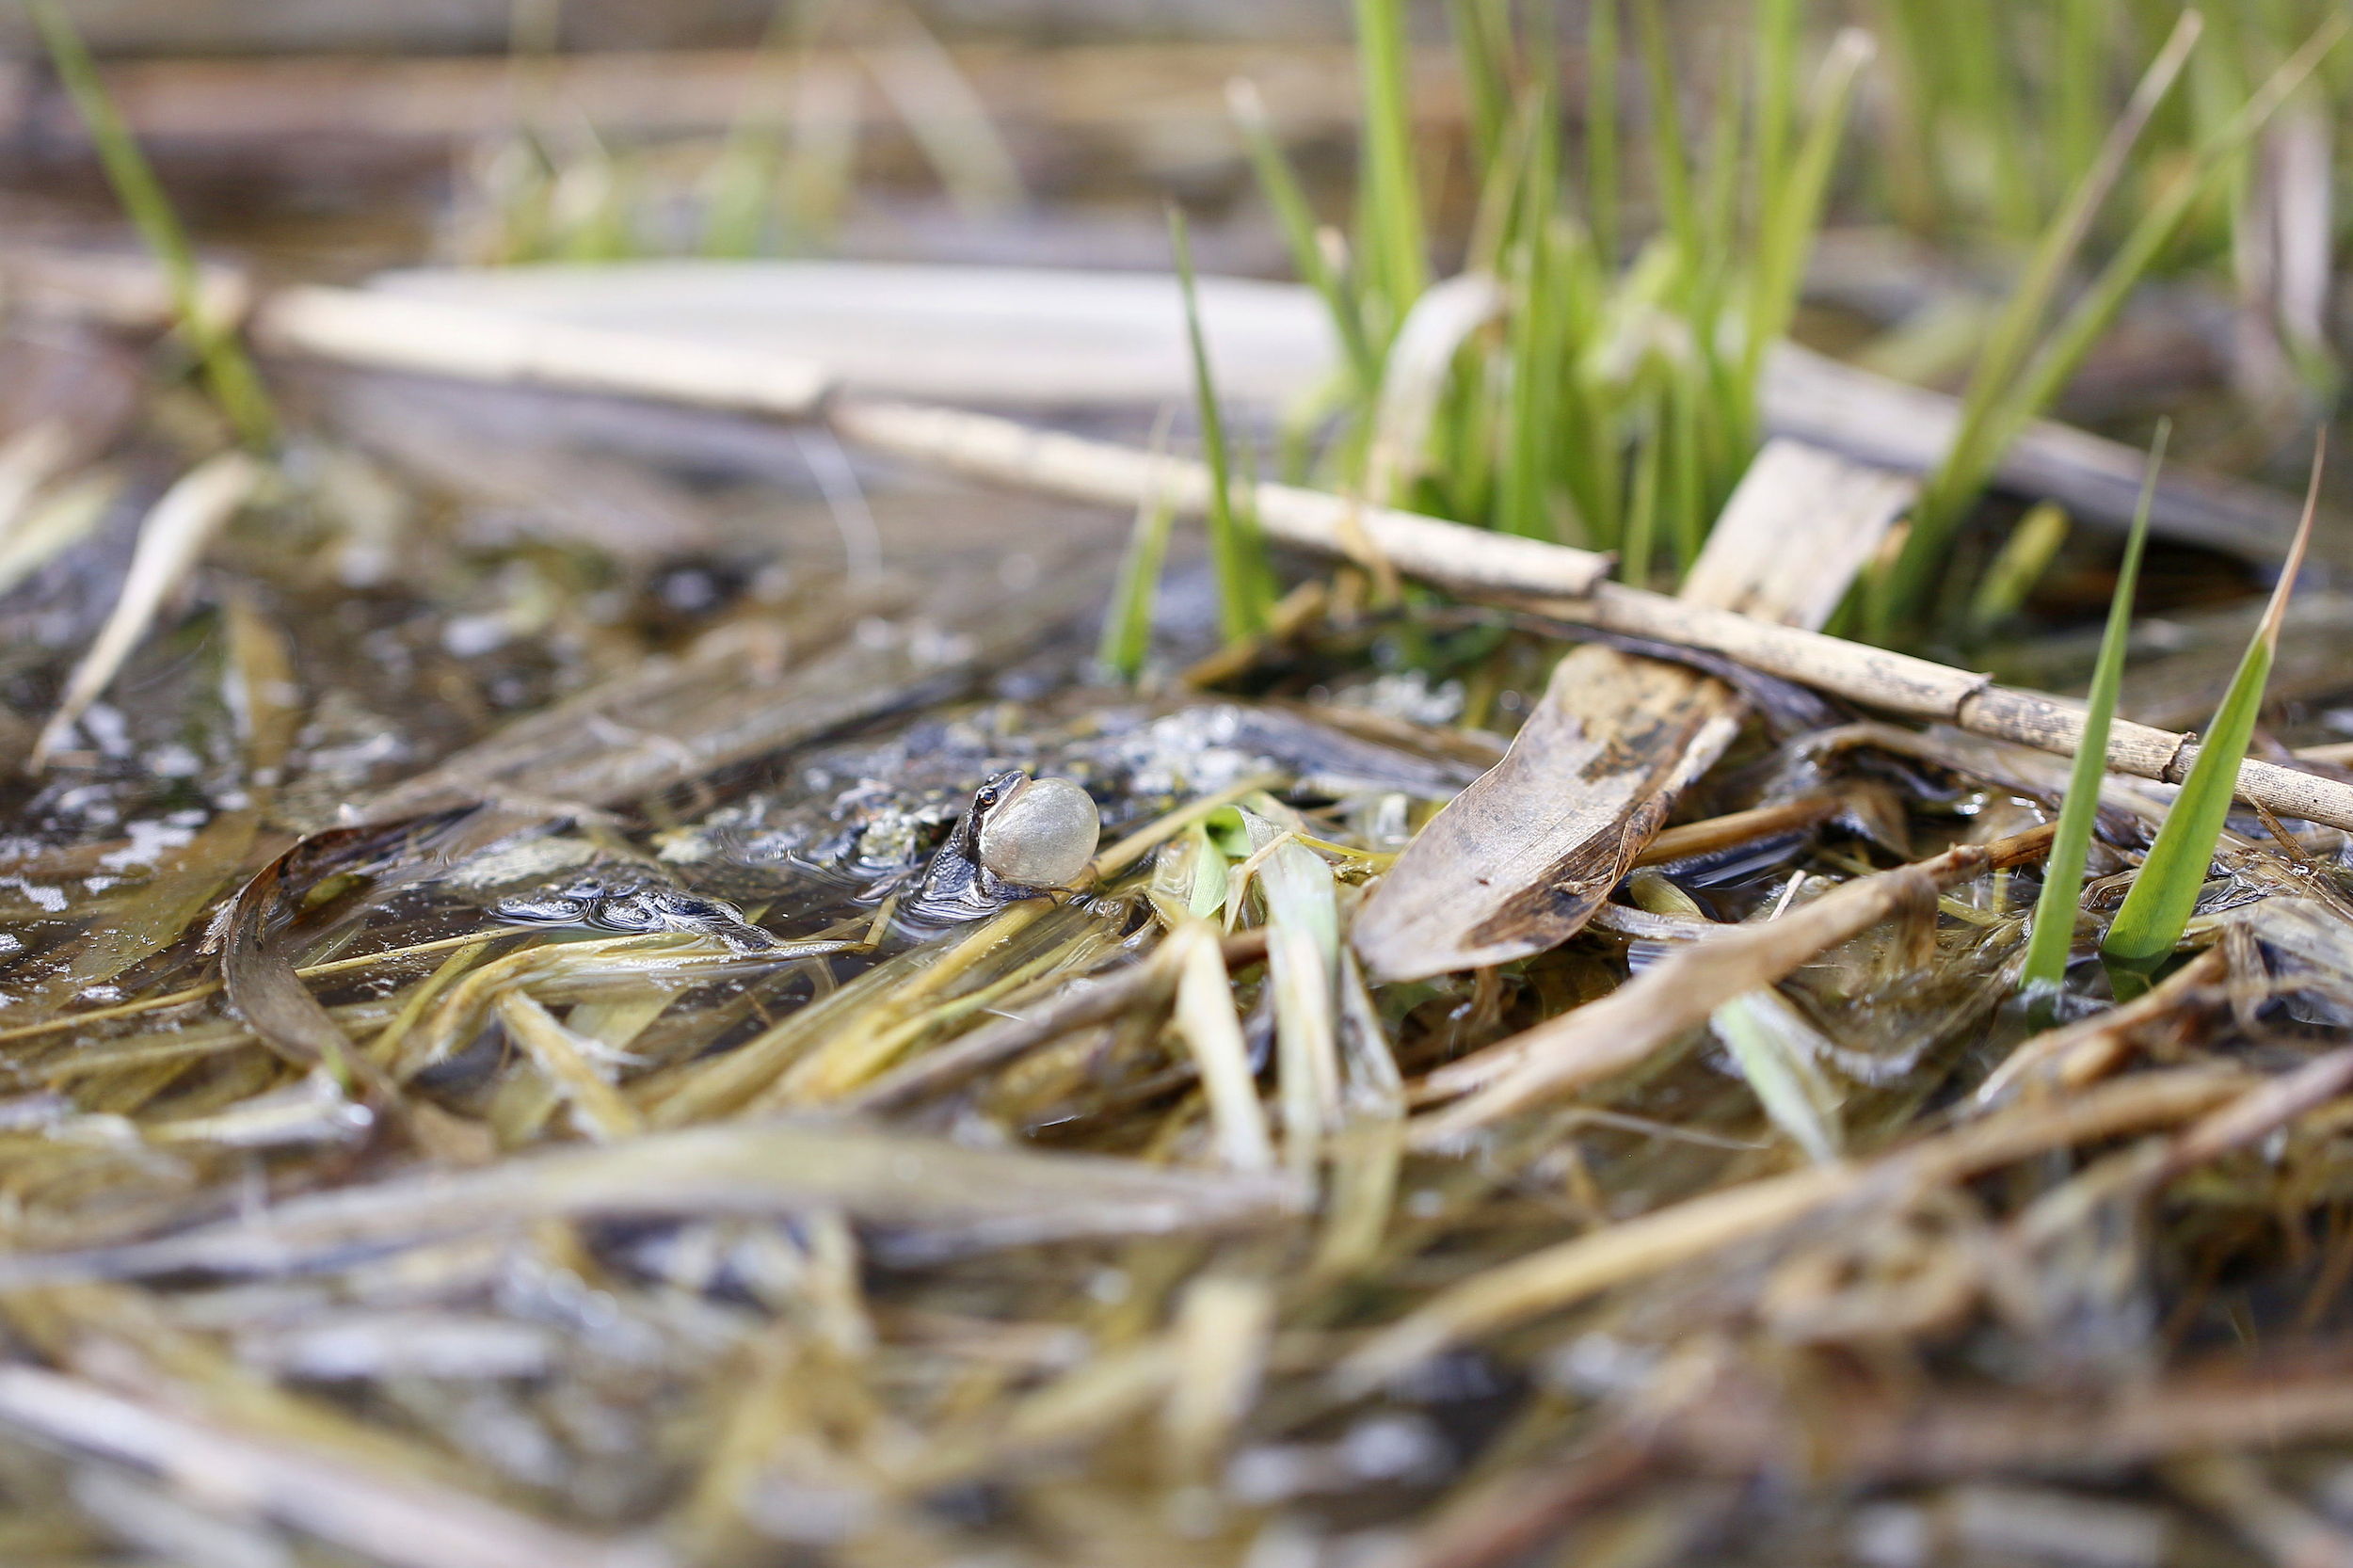 A chorus frog sings at a pond in Longueuil, Quebec on April 15, 2022. Photo: Stephanie Foden